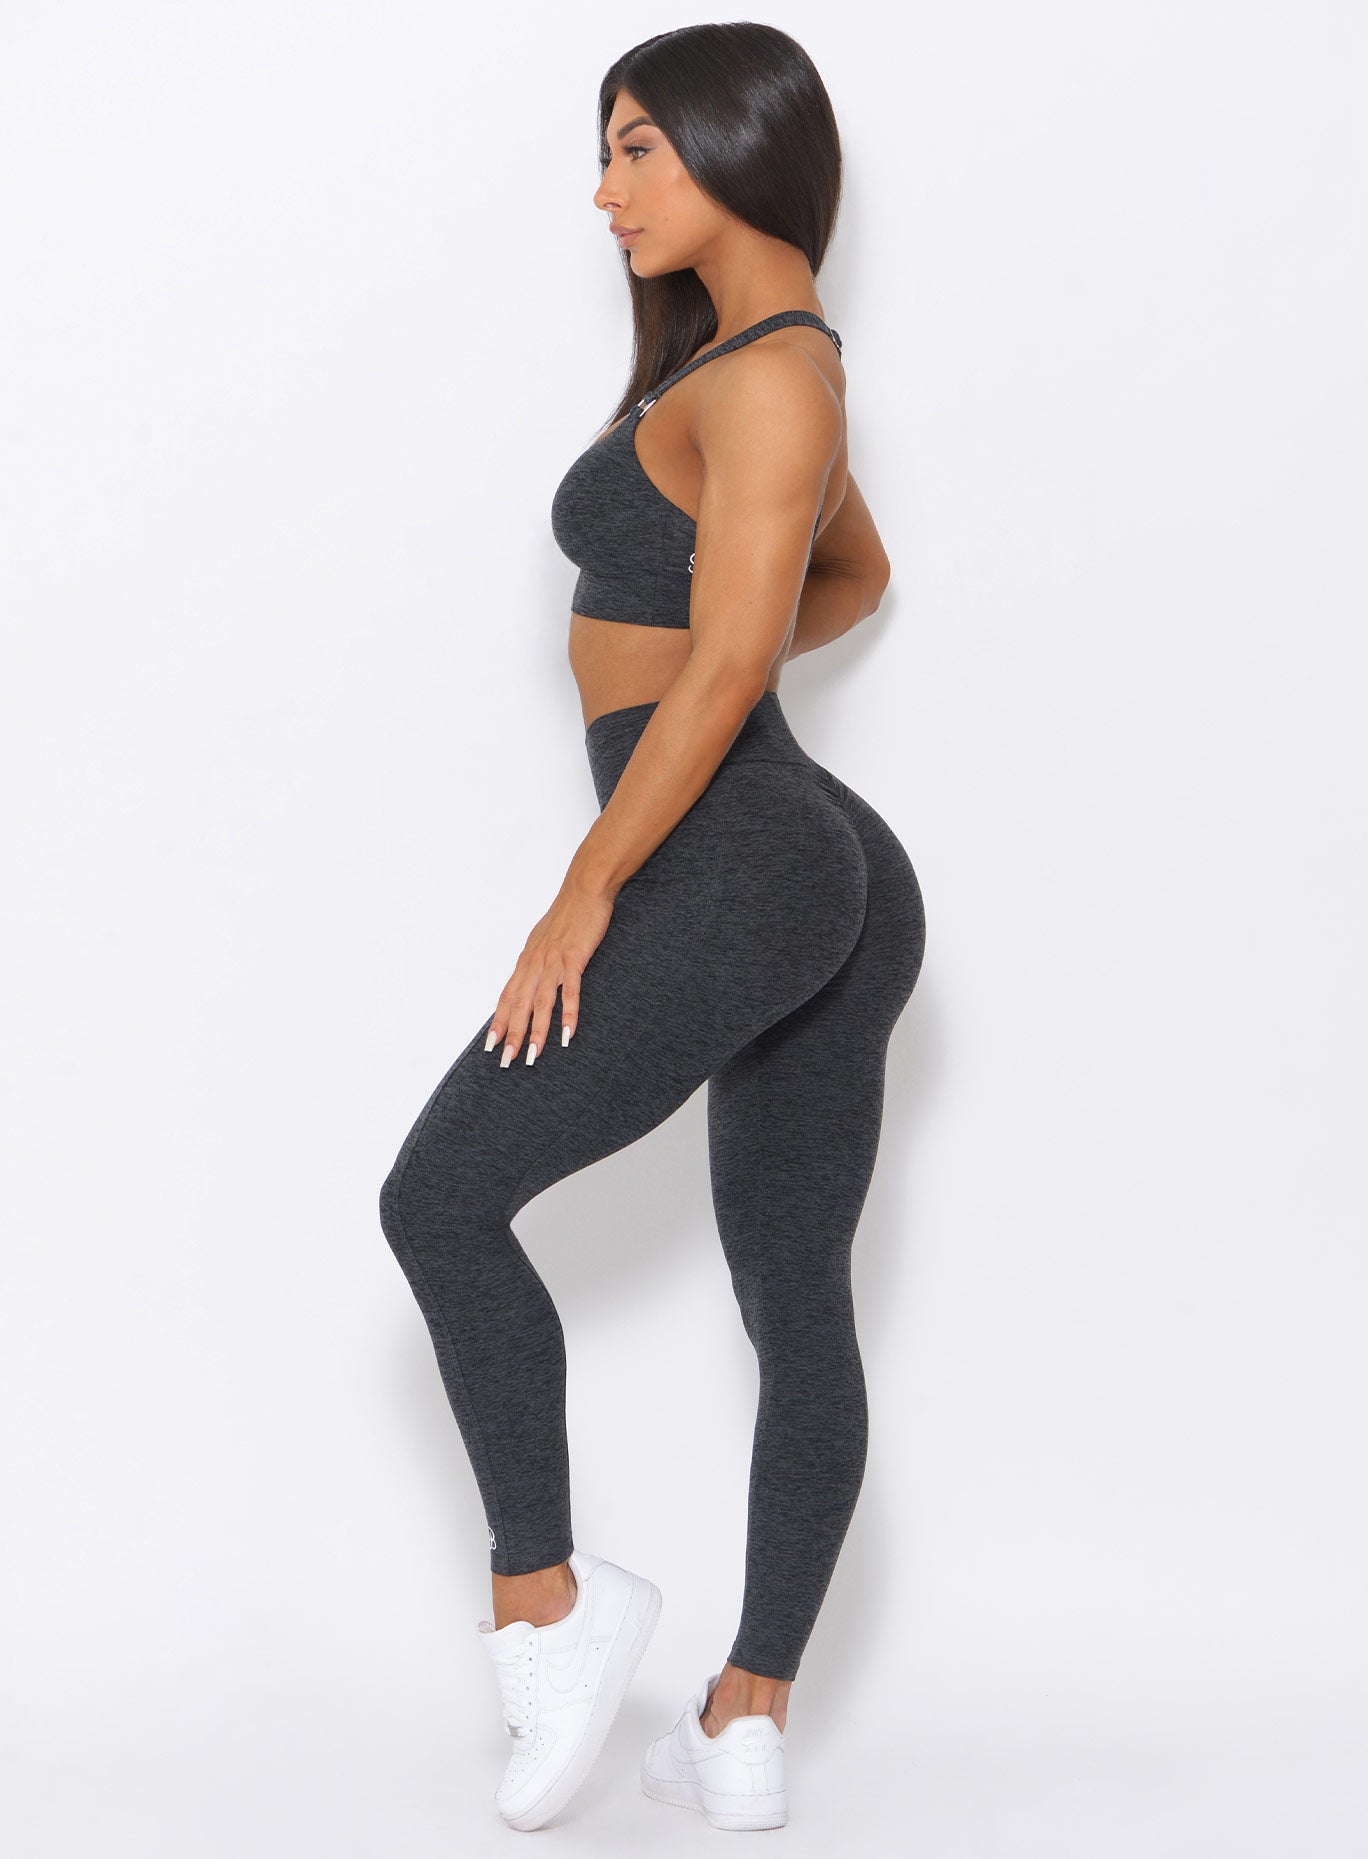 Left side view of the model wearing our curves high waist leggings in charcoal color and a matching bra